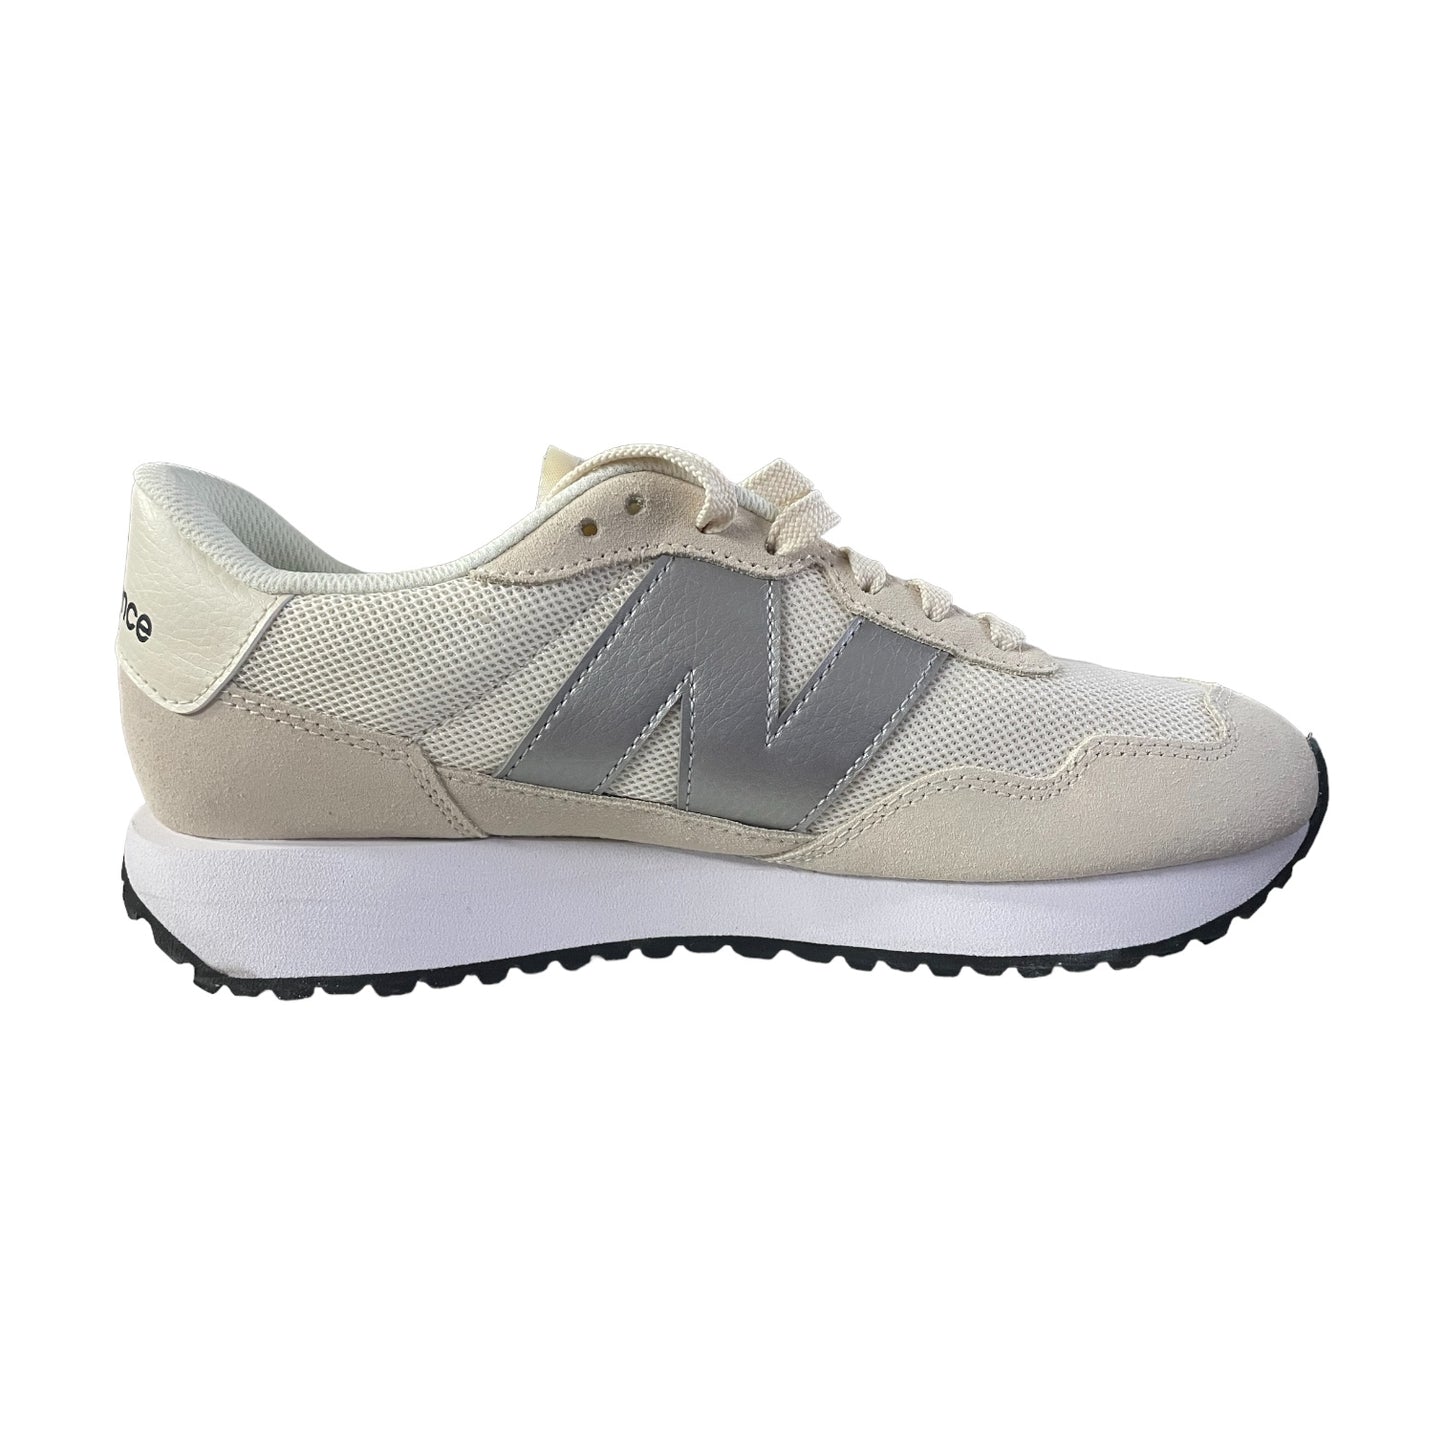 New Balance Women's 237 Suede Upper Casual Retro Lace-Up Sneakers